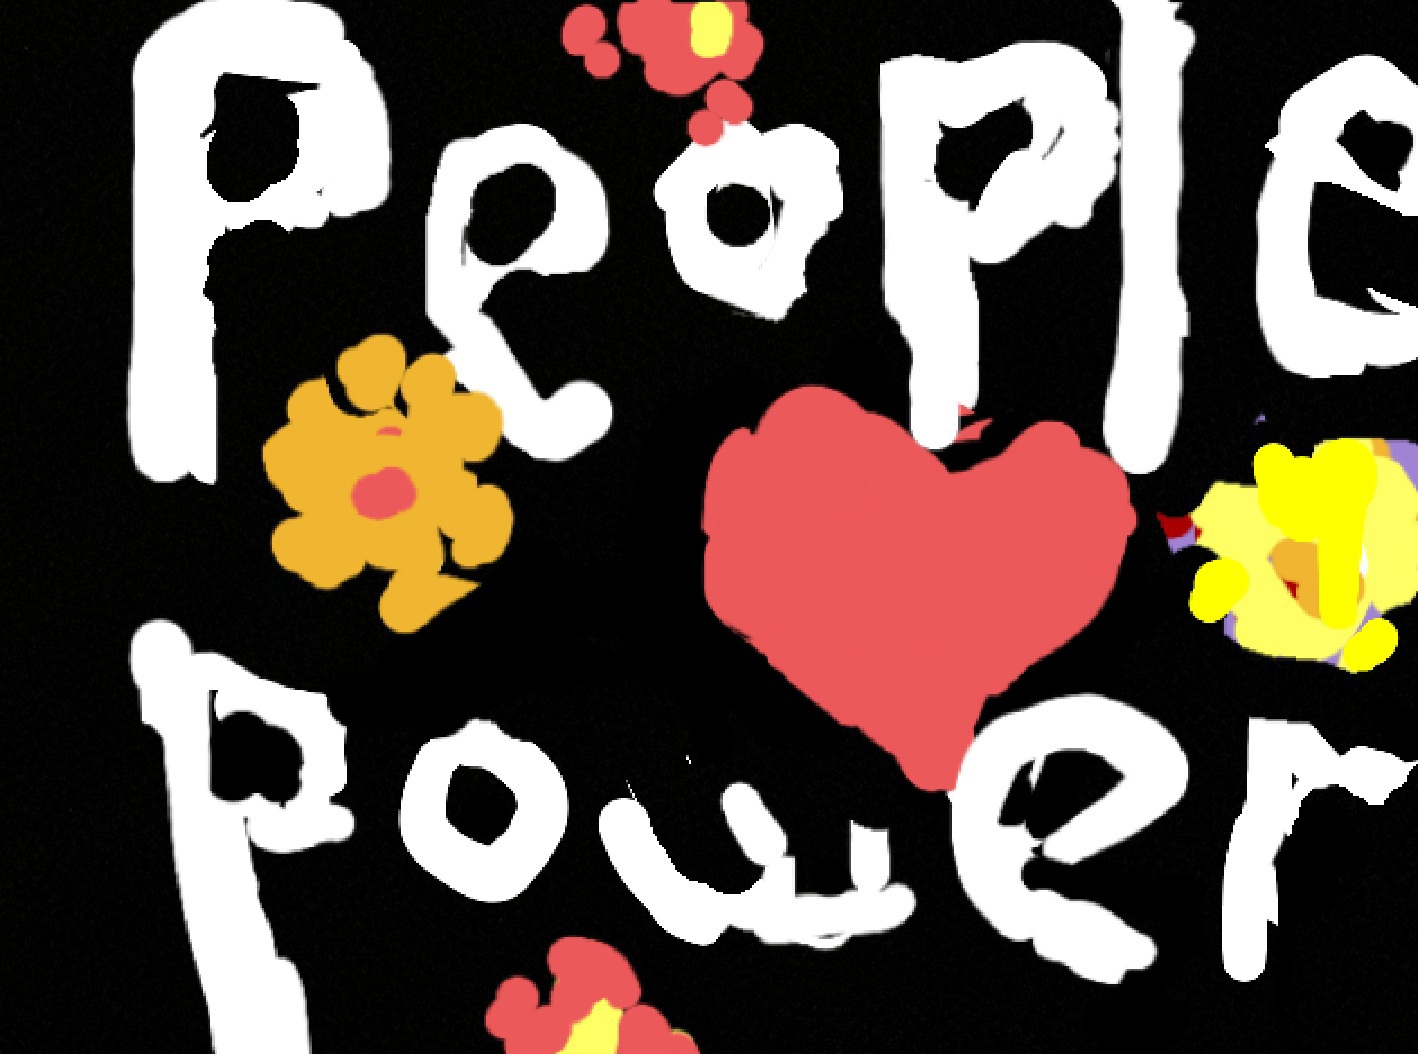 Poster with flowers and hearts says people power